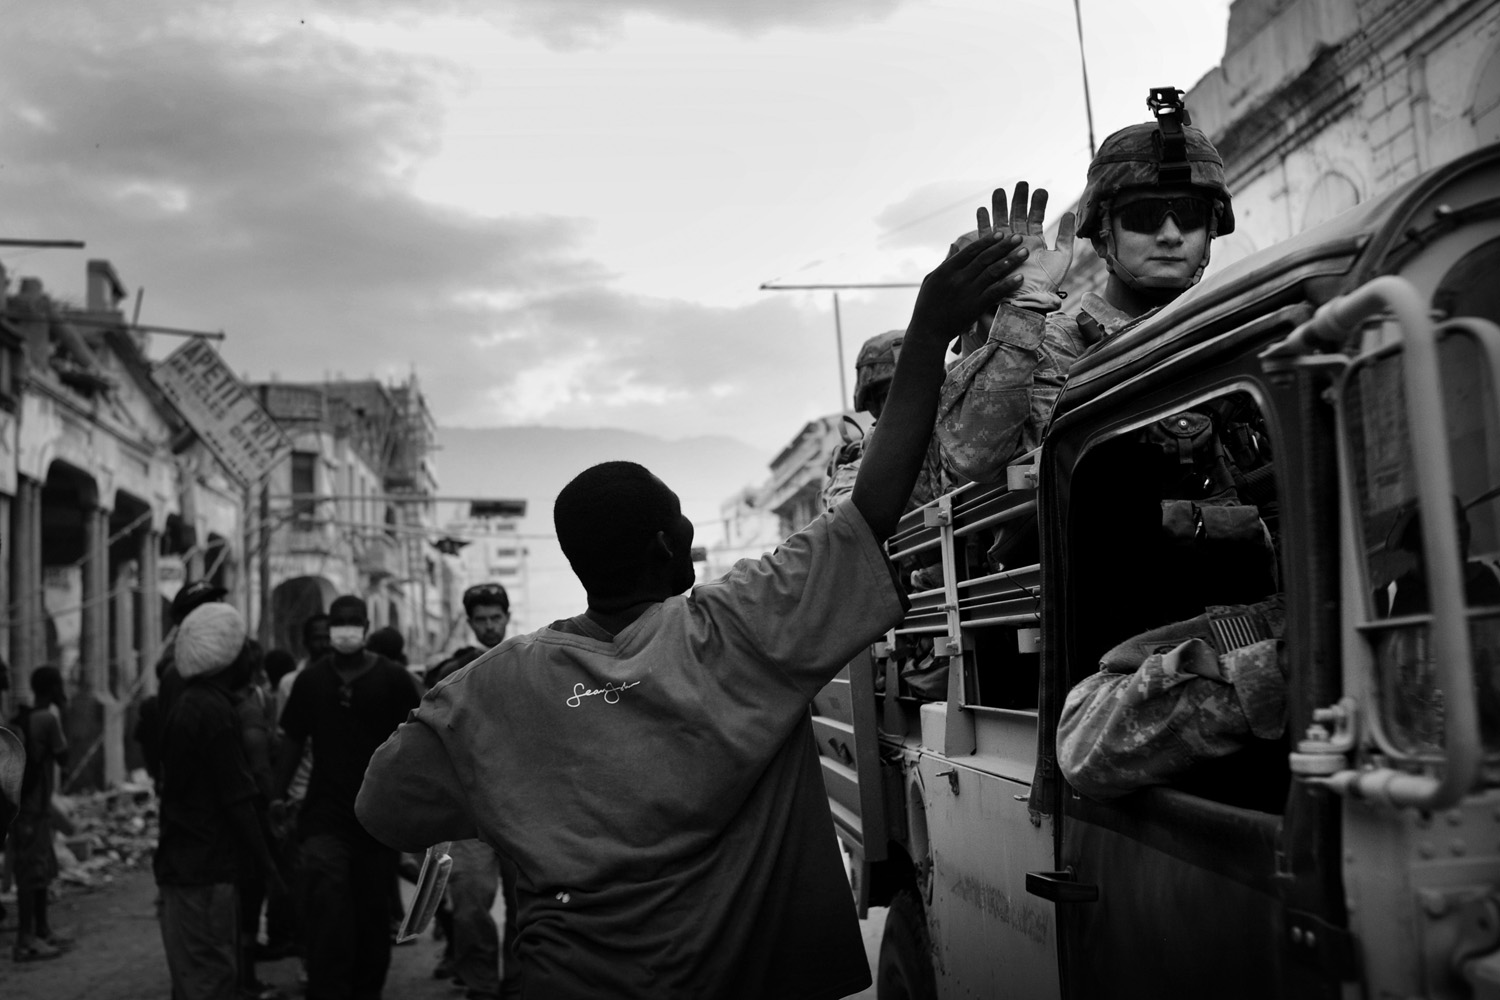 US Marines are greeted by Haitians in Port-au-Prince one week after the quake.